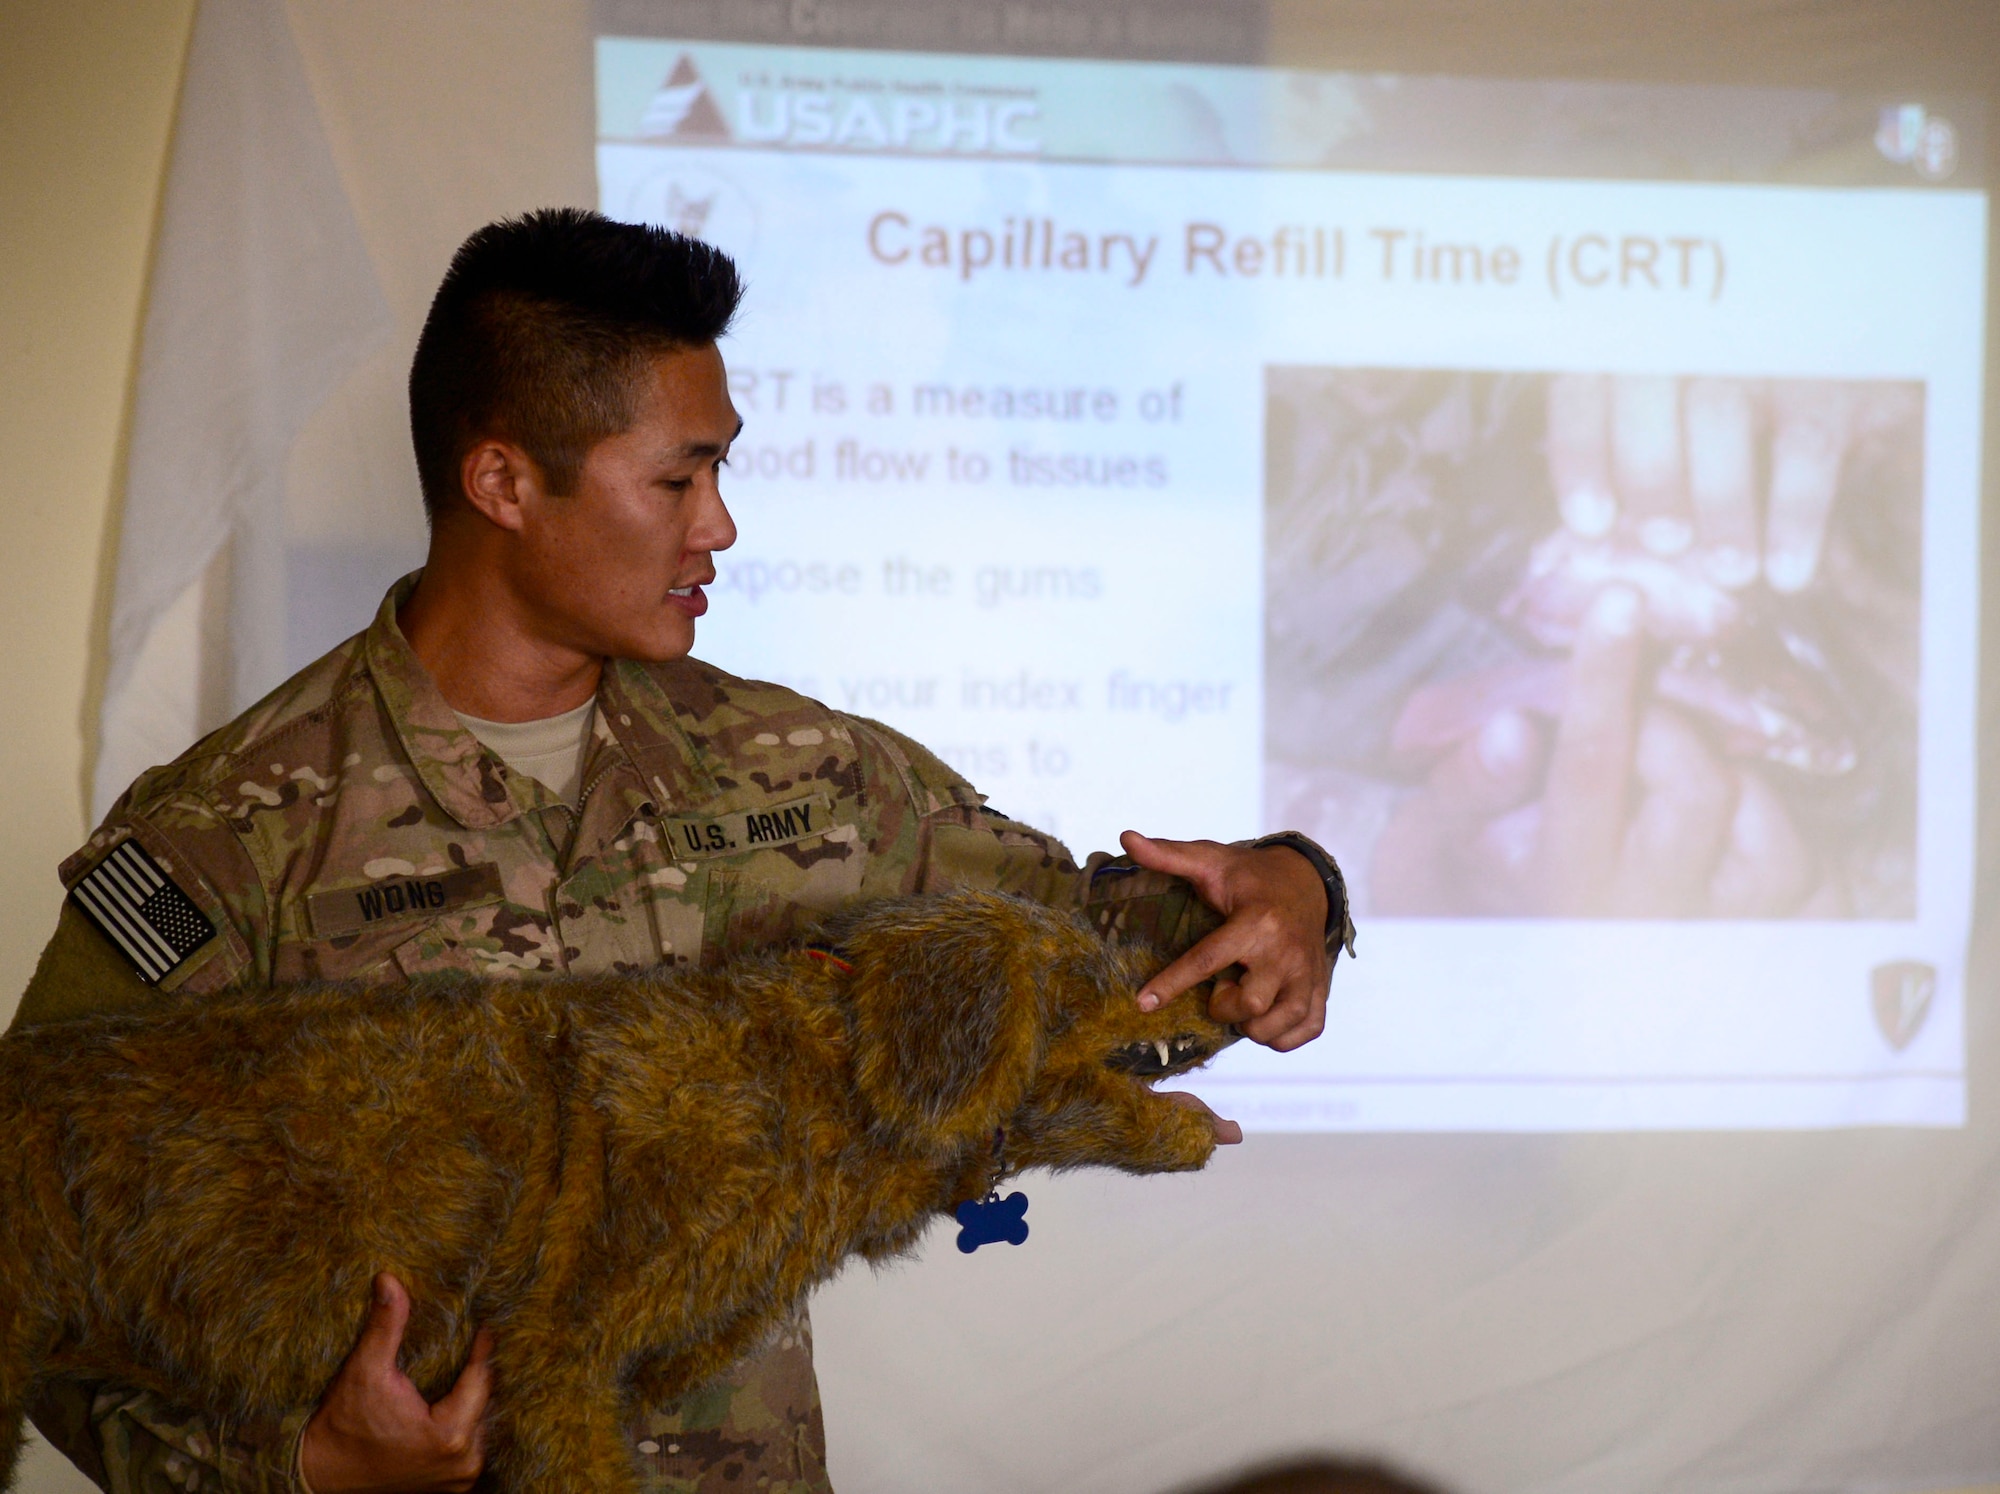 U.S. Army Capt. Raymond Wong, 463rd Military Detachment Veterinary Service veterinary officer in charge, demonstrates ways to check the capillary refill at a Military Working Dog medical emergency training at an undisclosed location in Southwest Asia, Sept. 12, 2015. The veterinary service team conducted training in hospitals throughout the area of responsibility to provide information on support and stabilizing MWDs until more advanced care is available. (U.S. Air Force photo by Senior Airman Racheal E. Watson/Released)